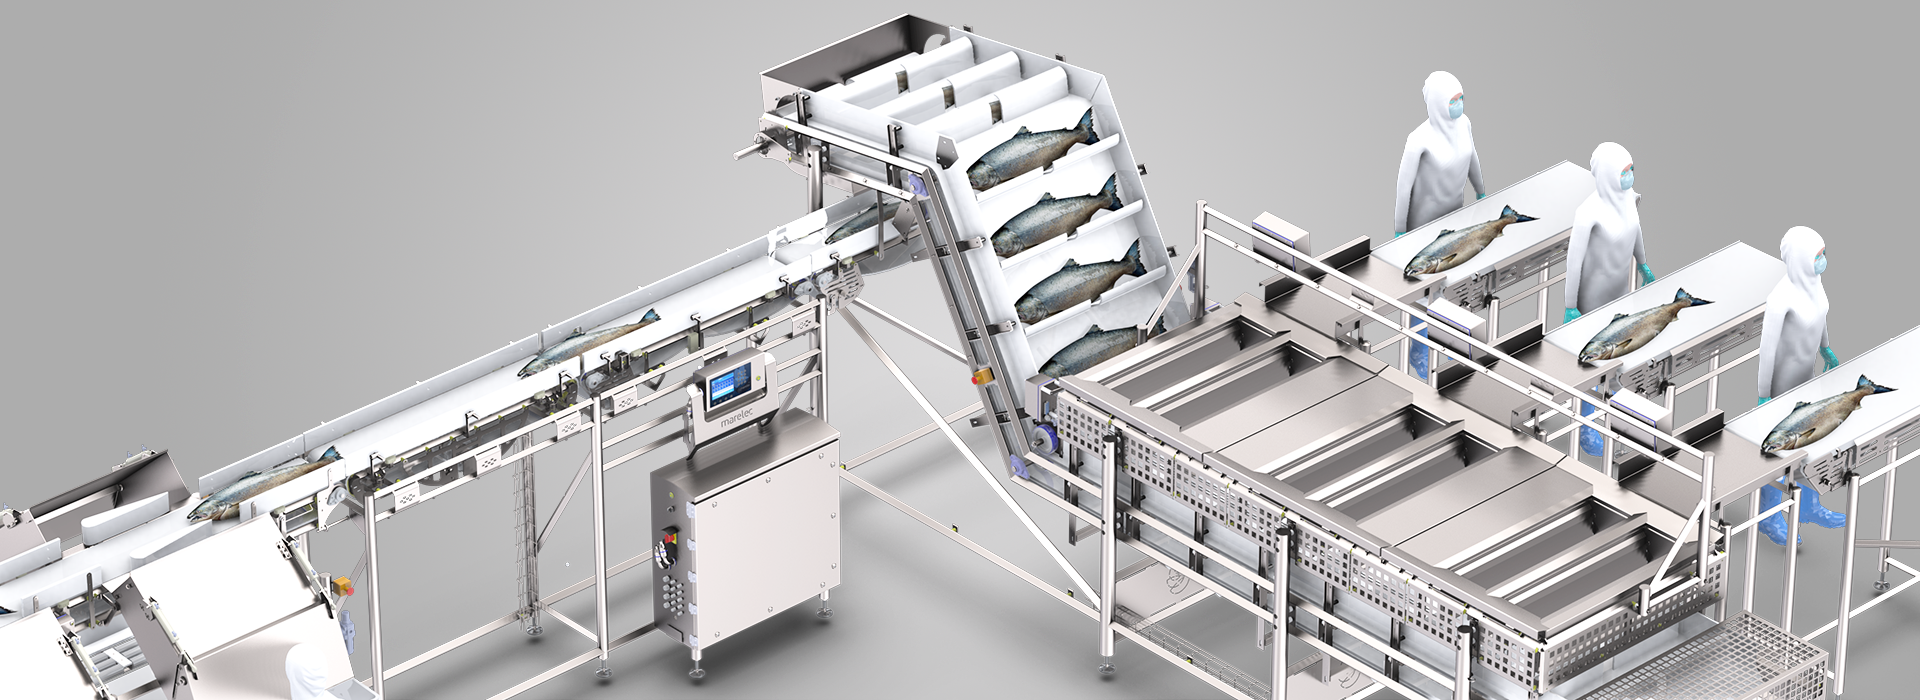 MARELEC's fast and gentle salmon grader provides unparalleled accuracy with unlimited sorting capabilities.